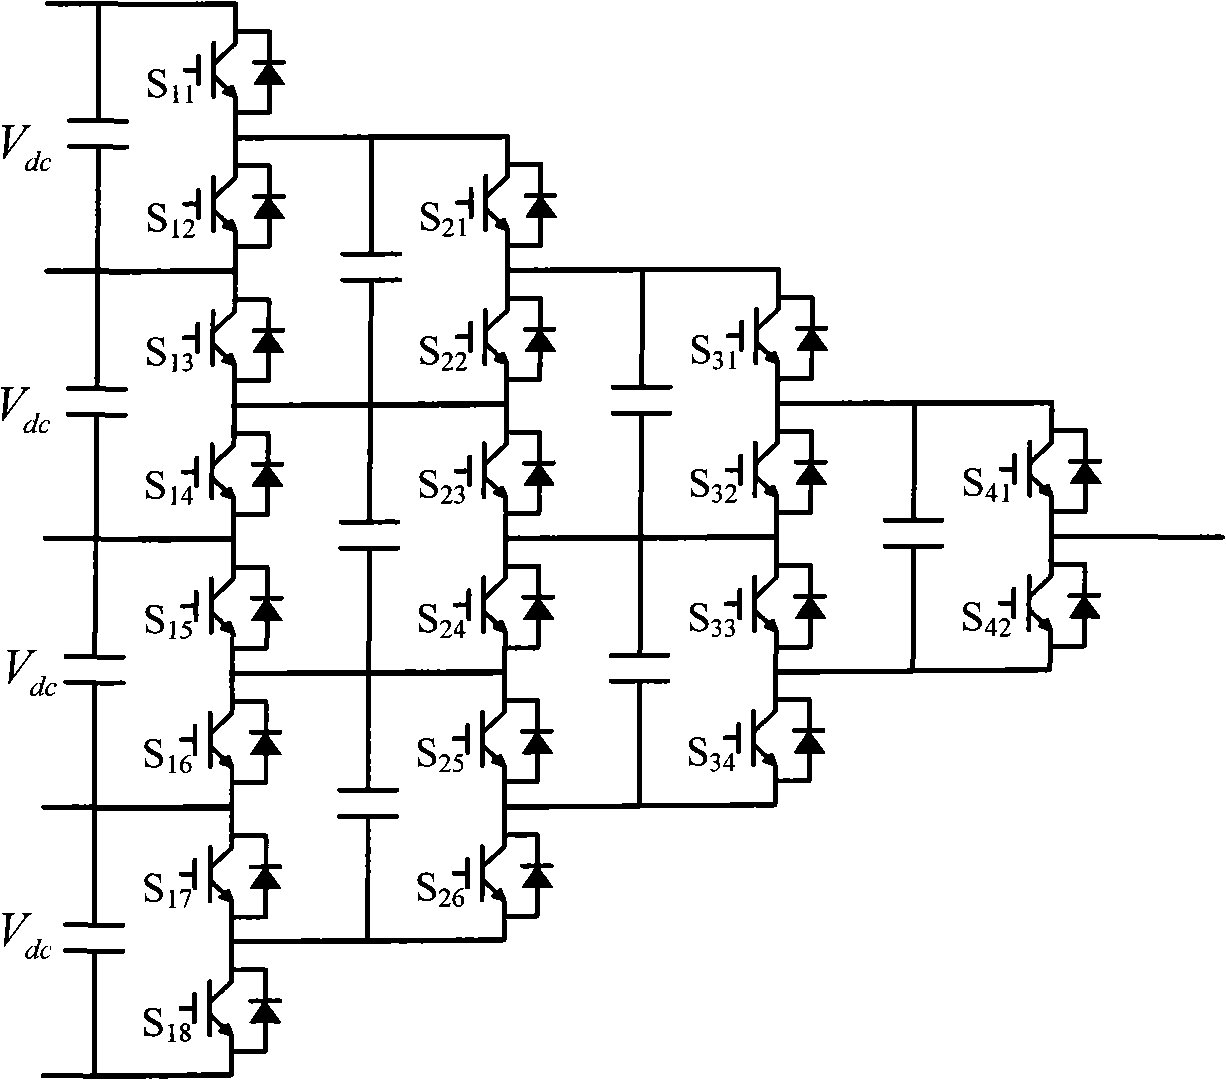 Single-phase circuit topology structure for clamp multi-level converter